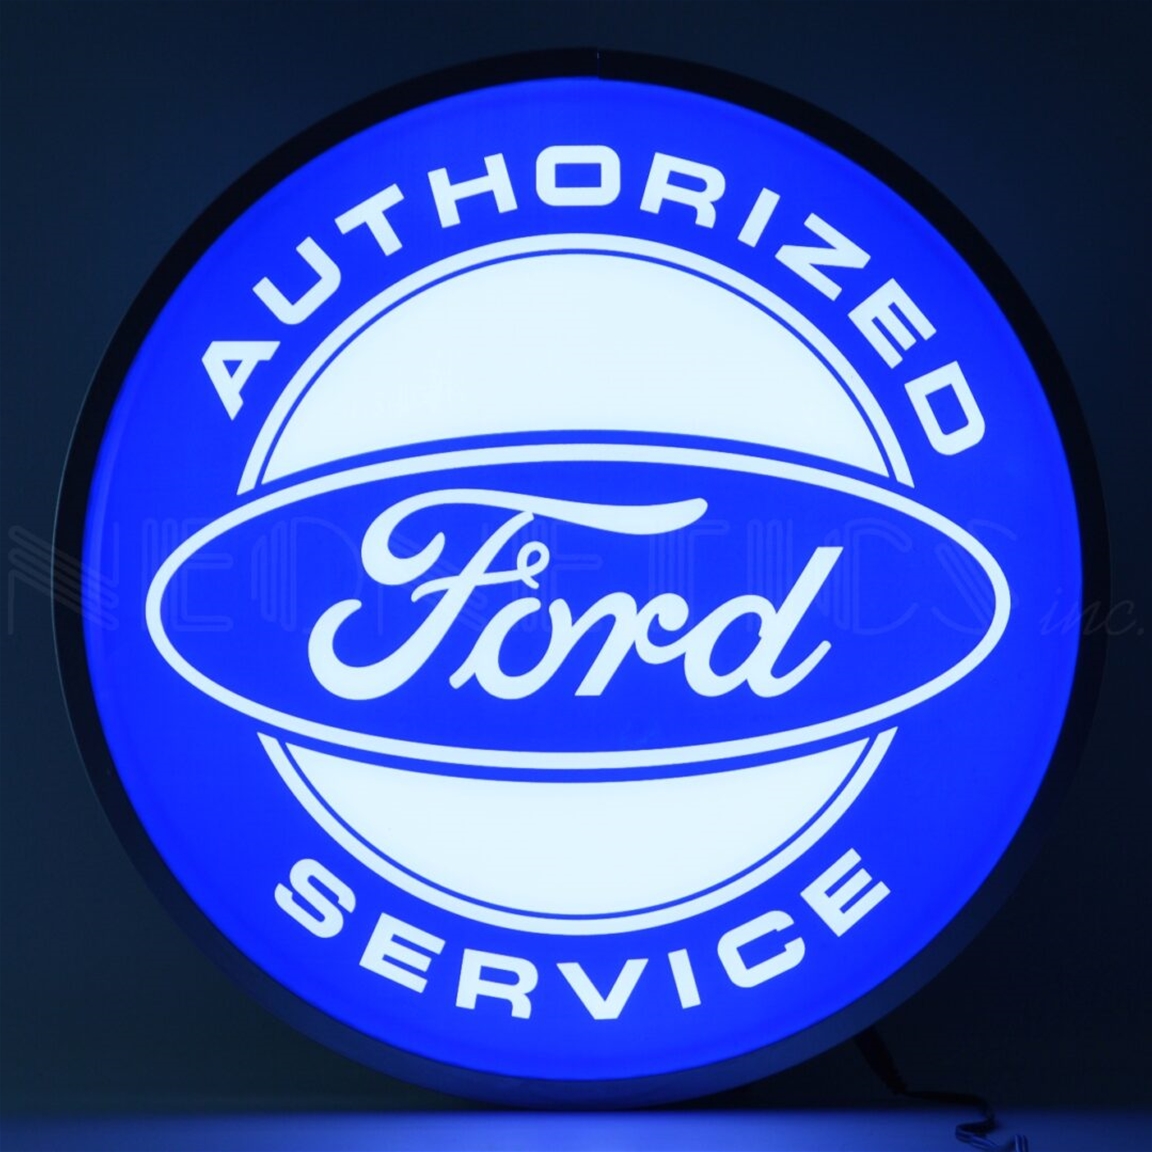 Ford Authorized Service Sign